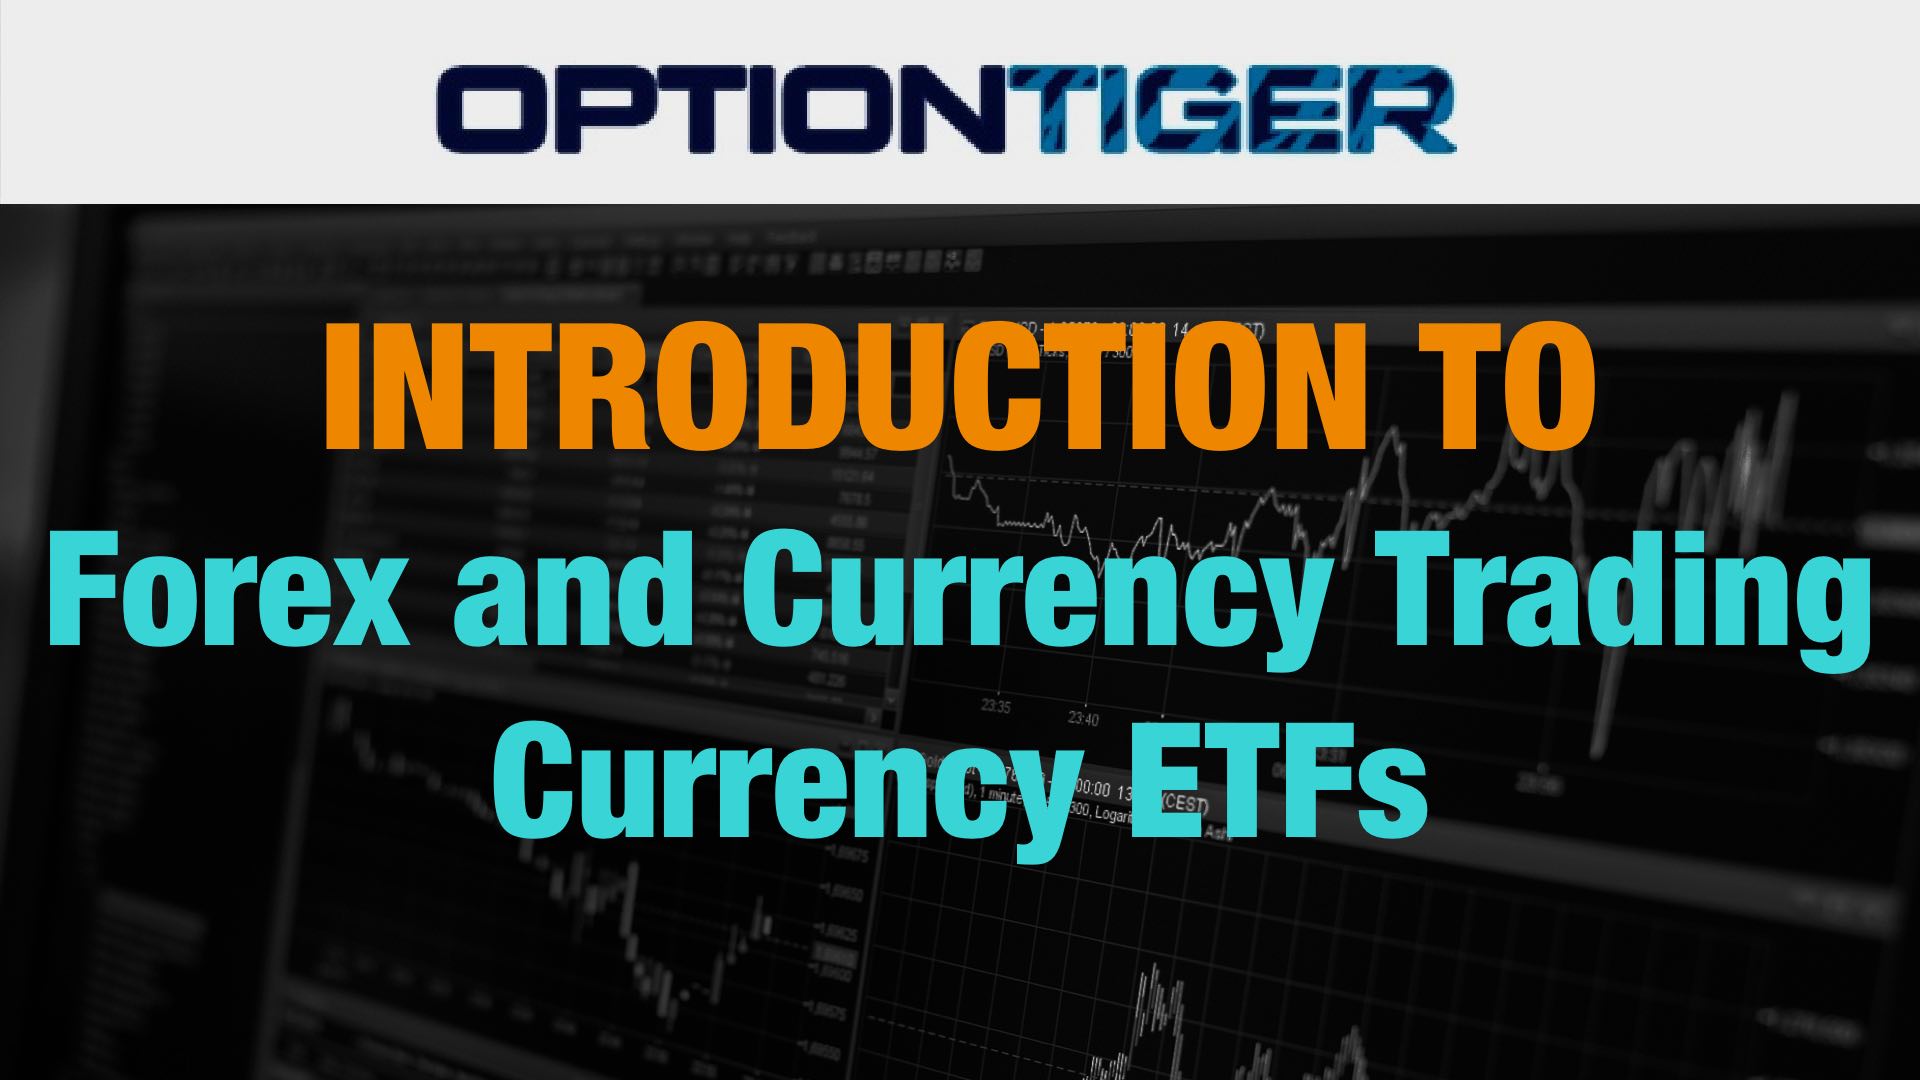 Introduction to Forex Trading and Currencies - OptionTiger